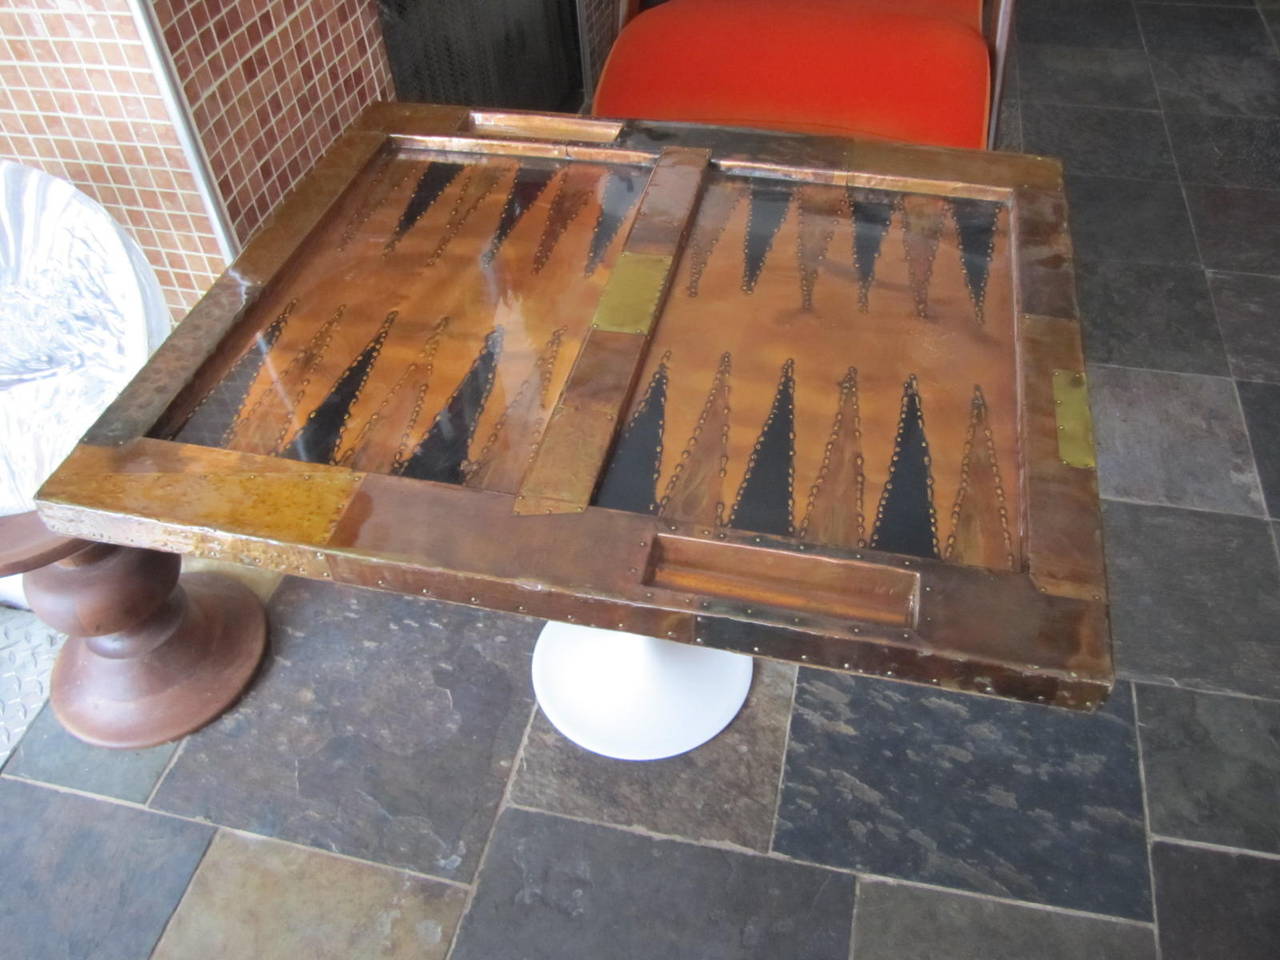 Fabulous and rare Paul Evans attributed backgammon board. This is the first time we have ever seen this piece and we absolutely love it. Any Paul Evans fan will love to add the special piece to their collection. The condition is Minty with very